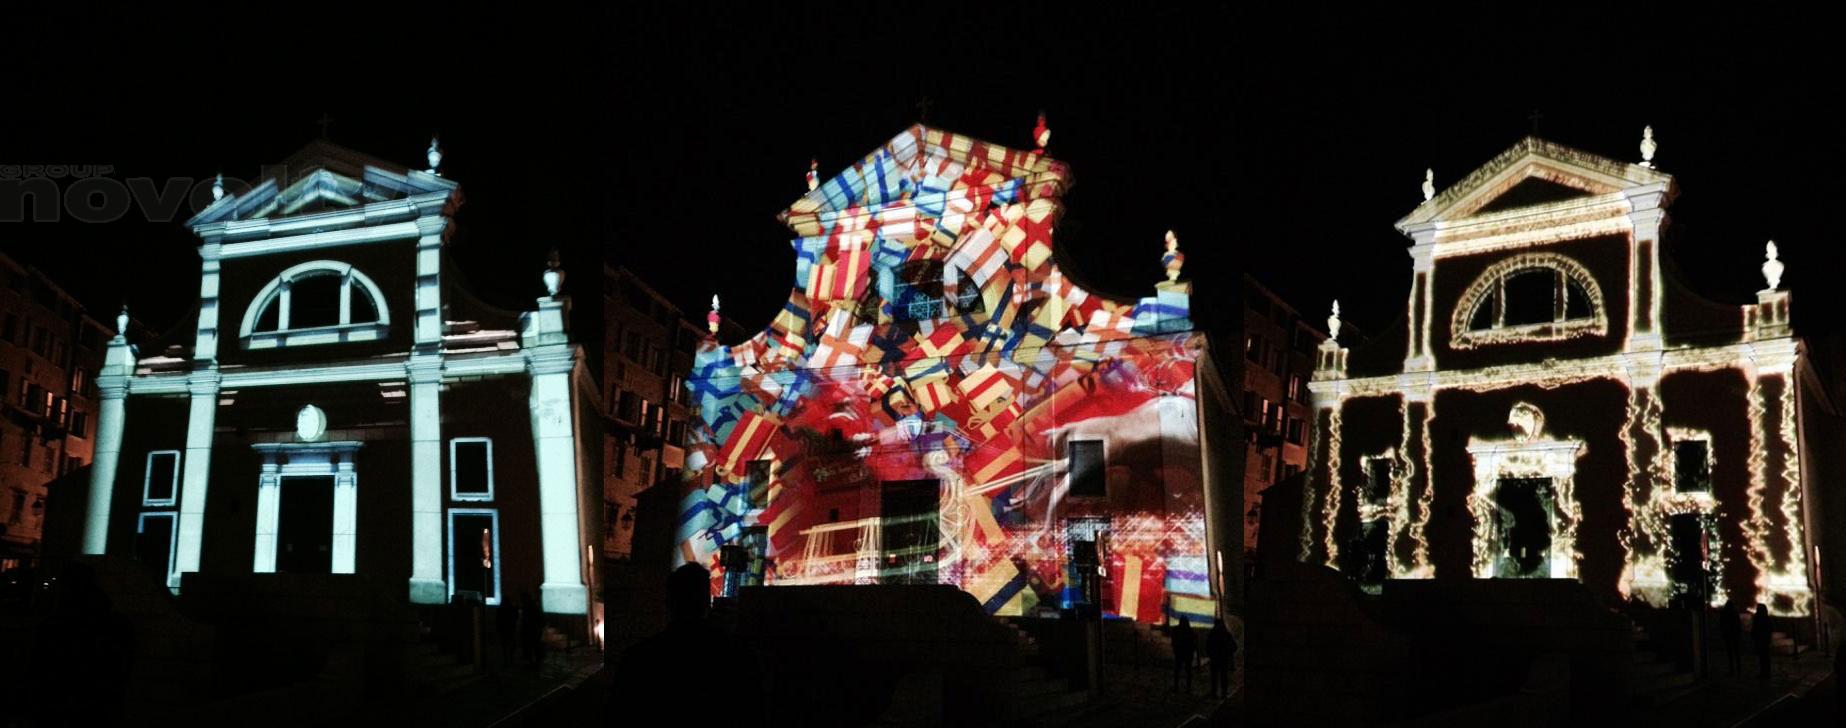 Visuel Mapping by Novelty à Ajaccio